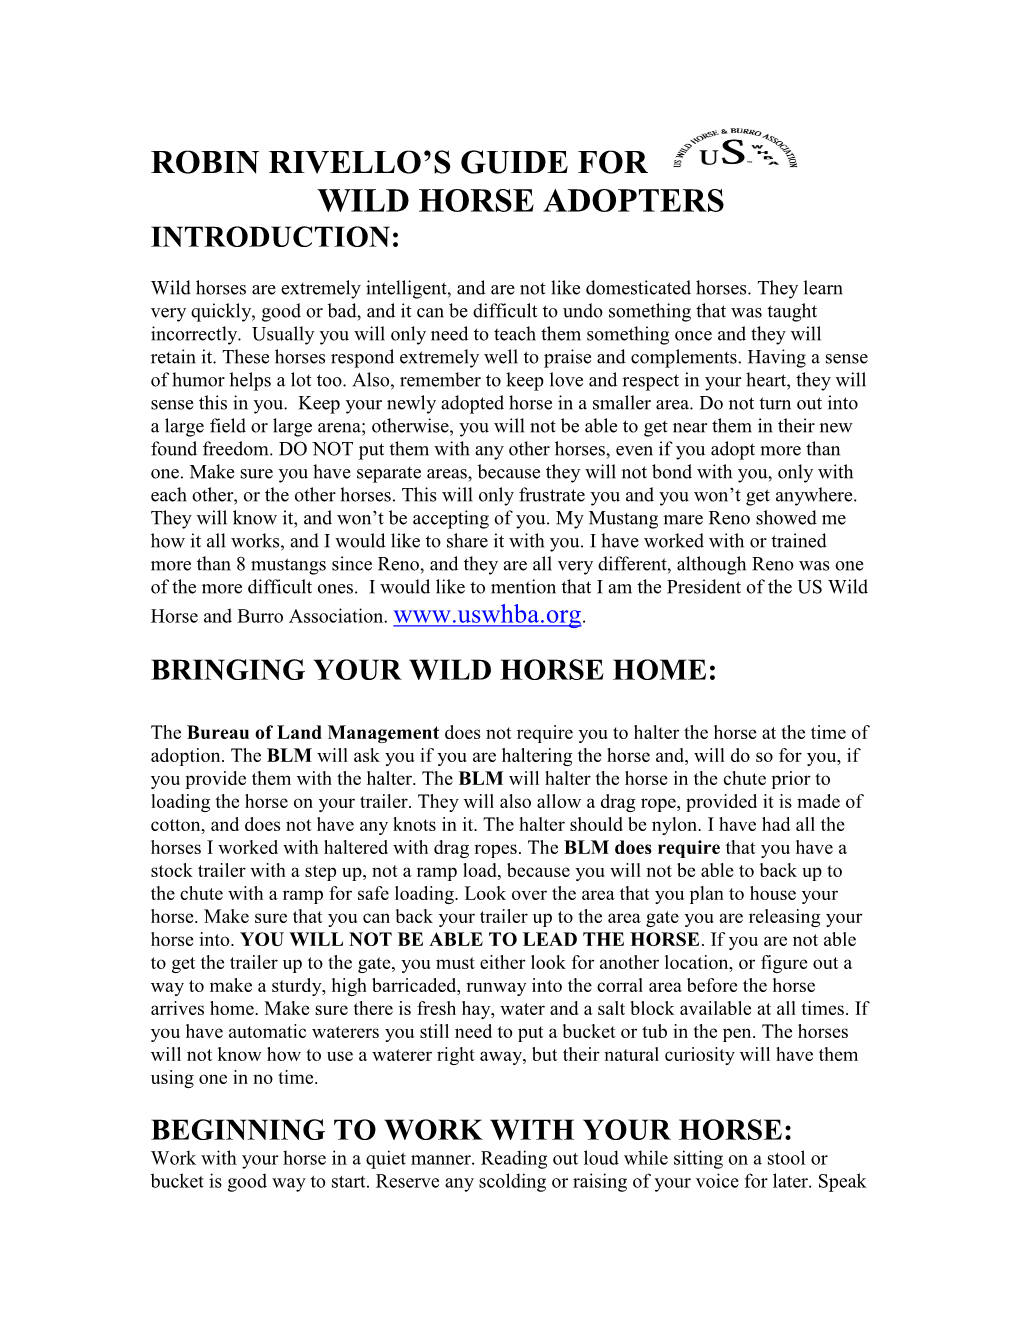 Robin Rivello's Guide for Wild Horse Adopters